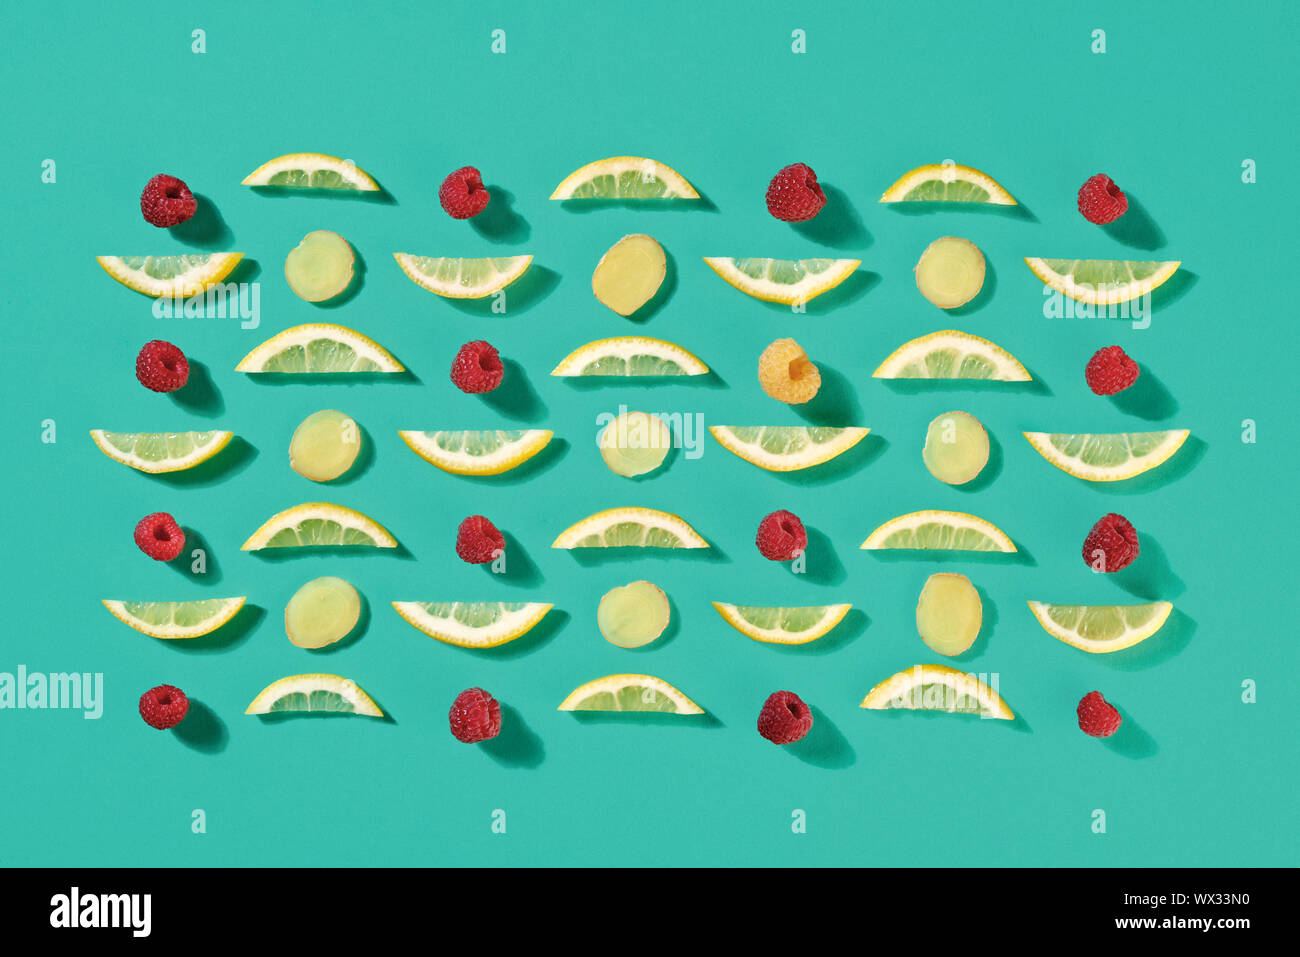 Ripe raspberry and lemon slices pattern of fruit on a blue background. Food layout. Flat lay Stock Photo